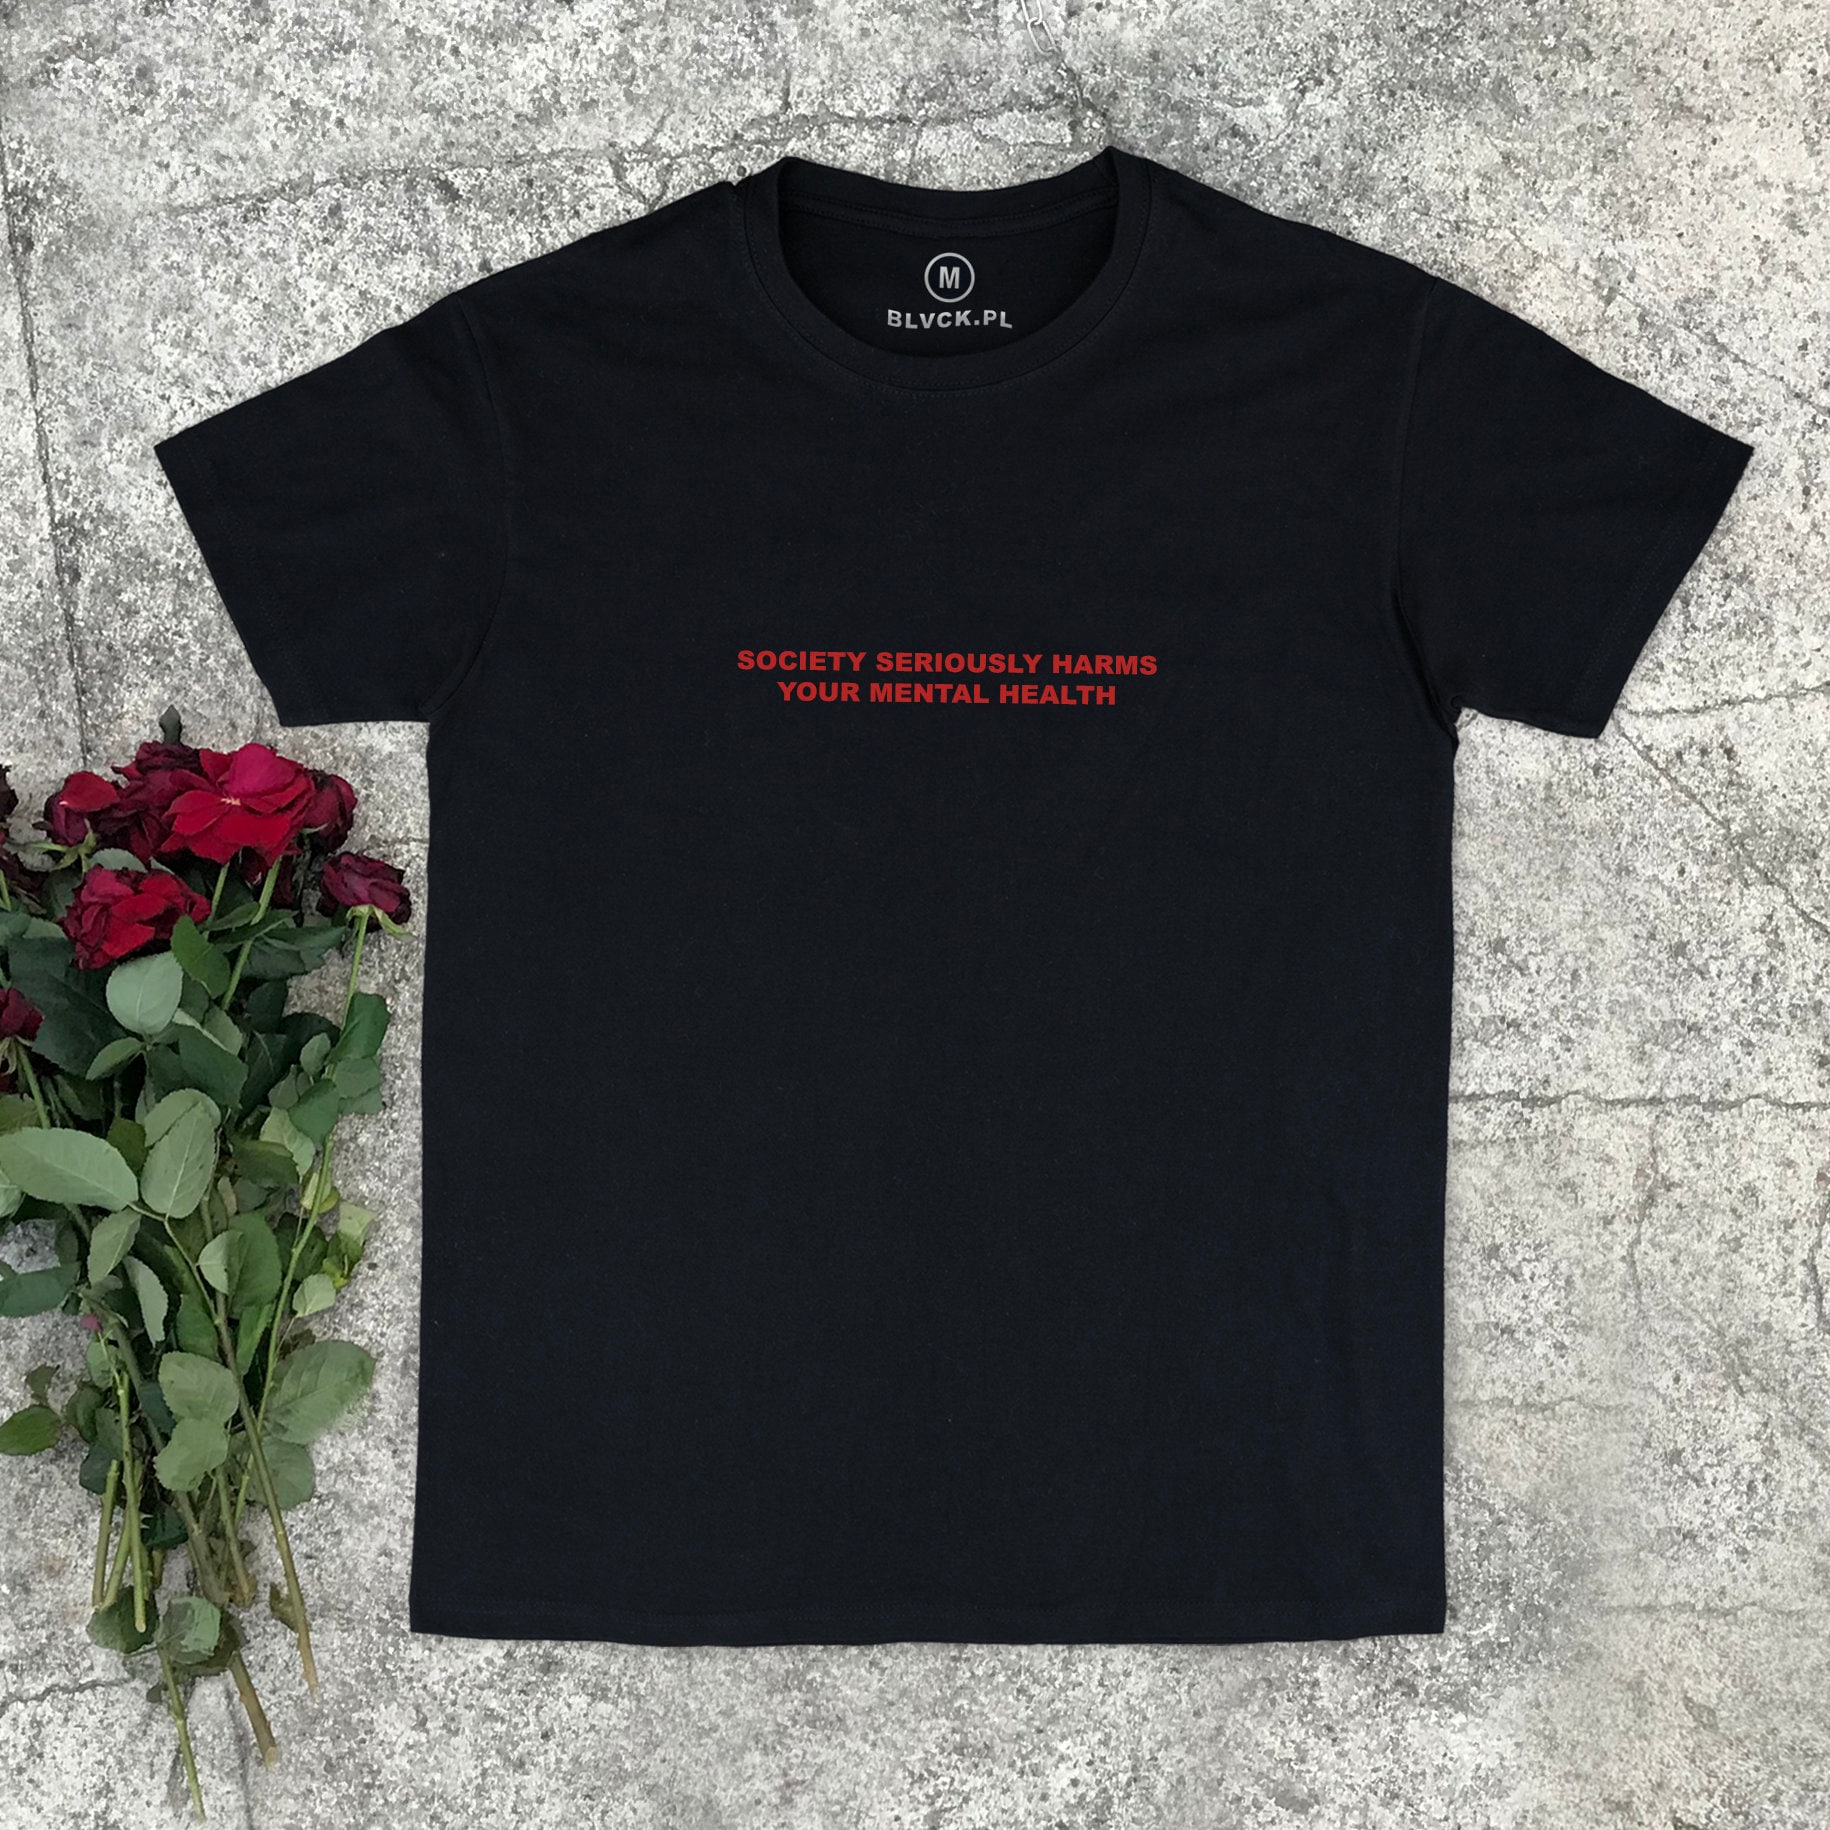 Society Seriously Harms Your Mental Health T Shirt Aesthetic Clothing Aesthetic Shirt Tumblr Clothing Tumblr Shirt Grunge Clothing